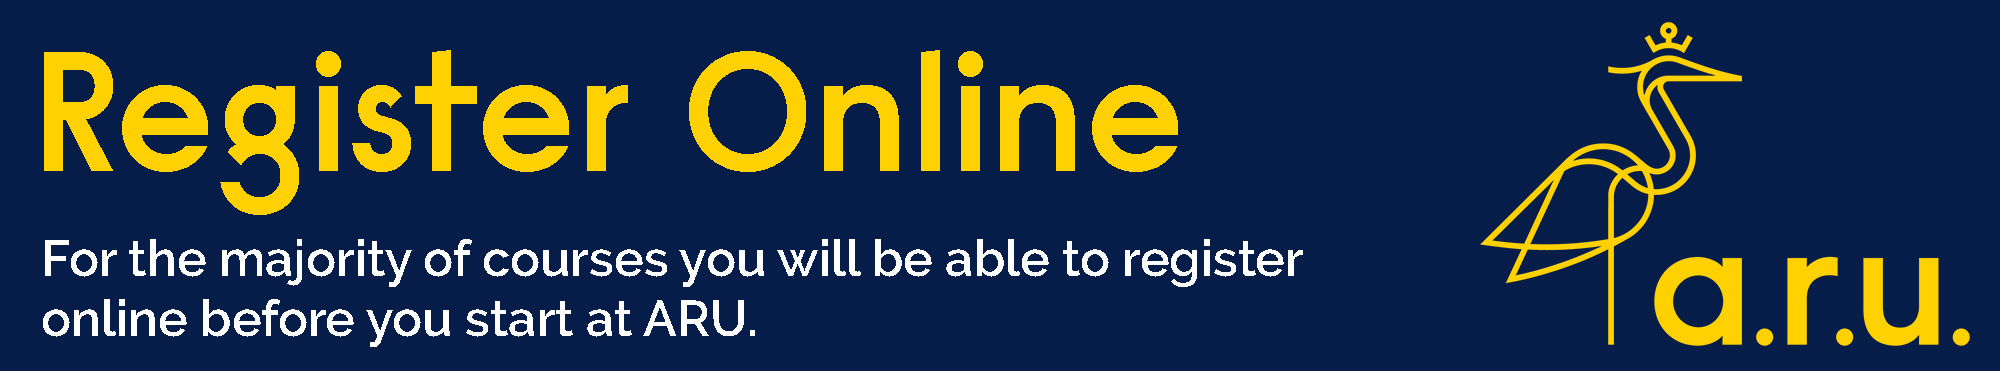 and link: Register Online. For the majority of courses you will be able to register online before you start at ARU.